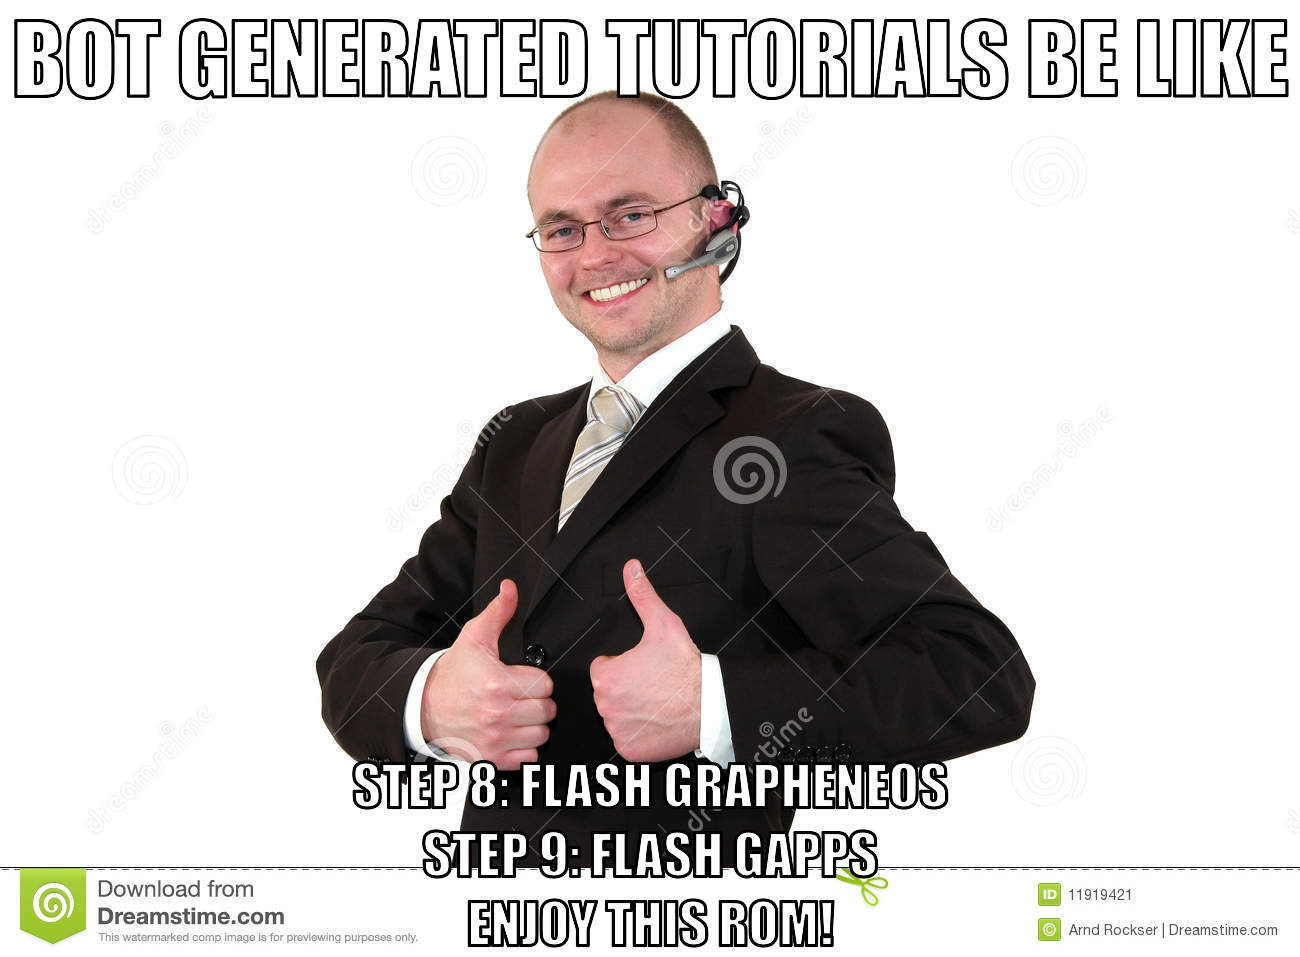 A stock image of a call center worker with his thumbs
                    up. Upper text says: 'Bot generated tutorials be like' and
                    bottom text says 'Step 8: Flash GrapheneOS, Step 9: Flash
                    GAPPS, Enjoy this ROM!'